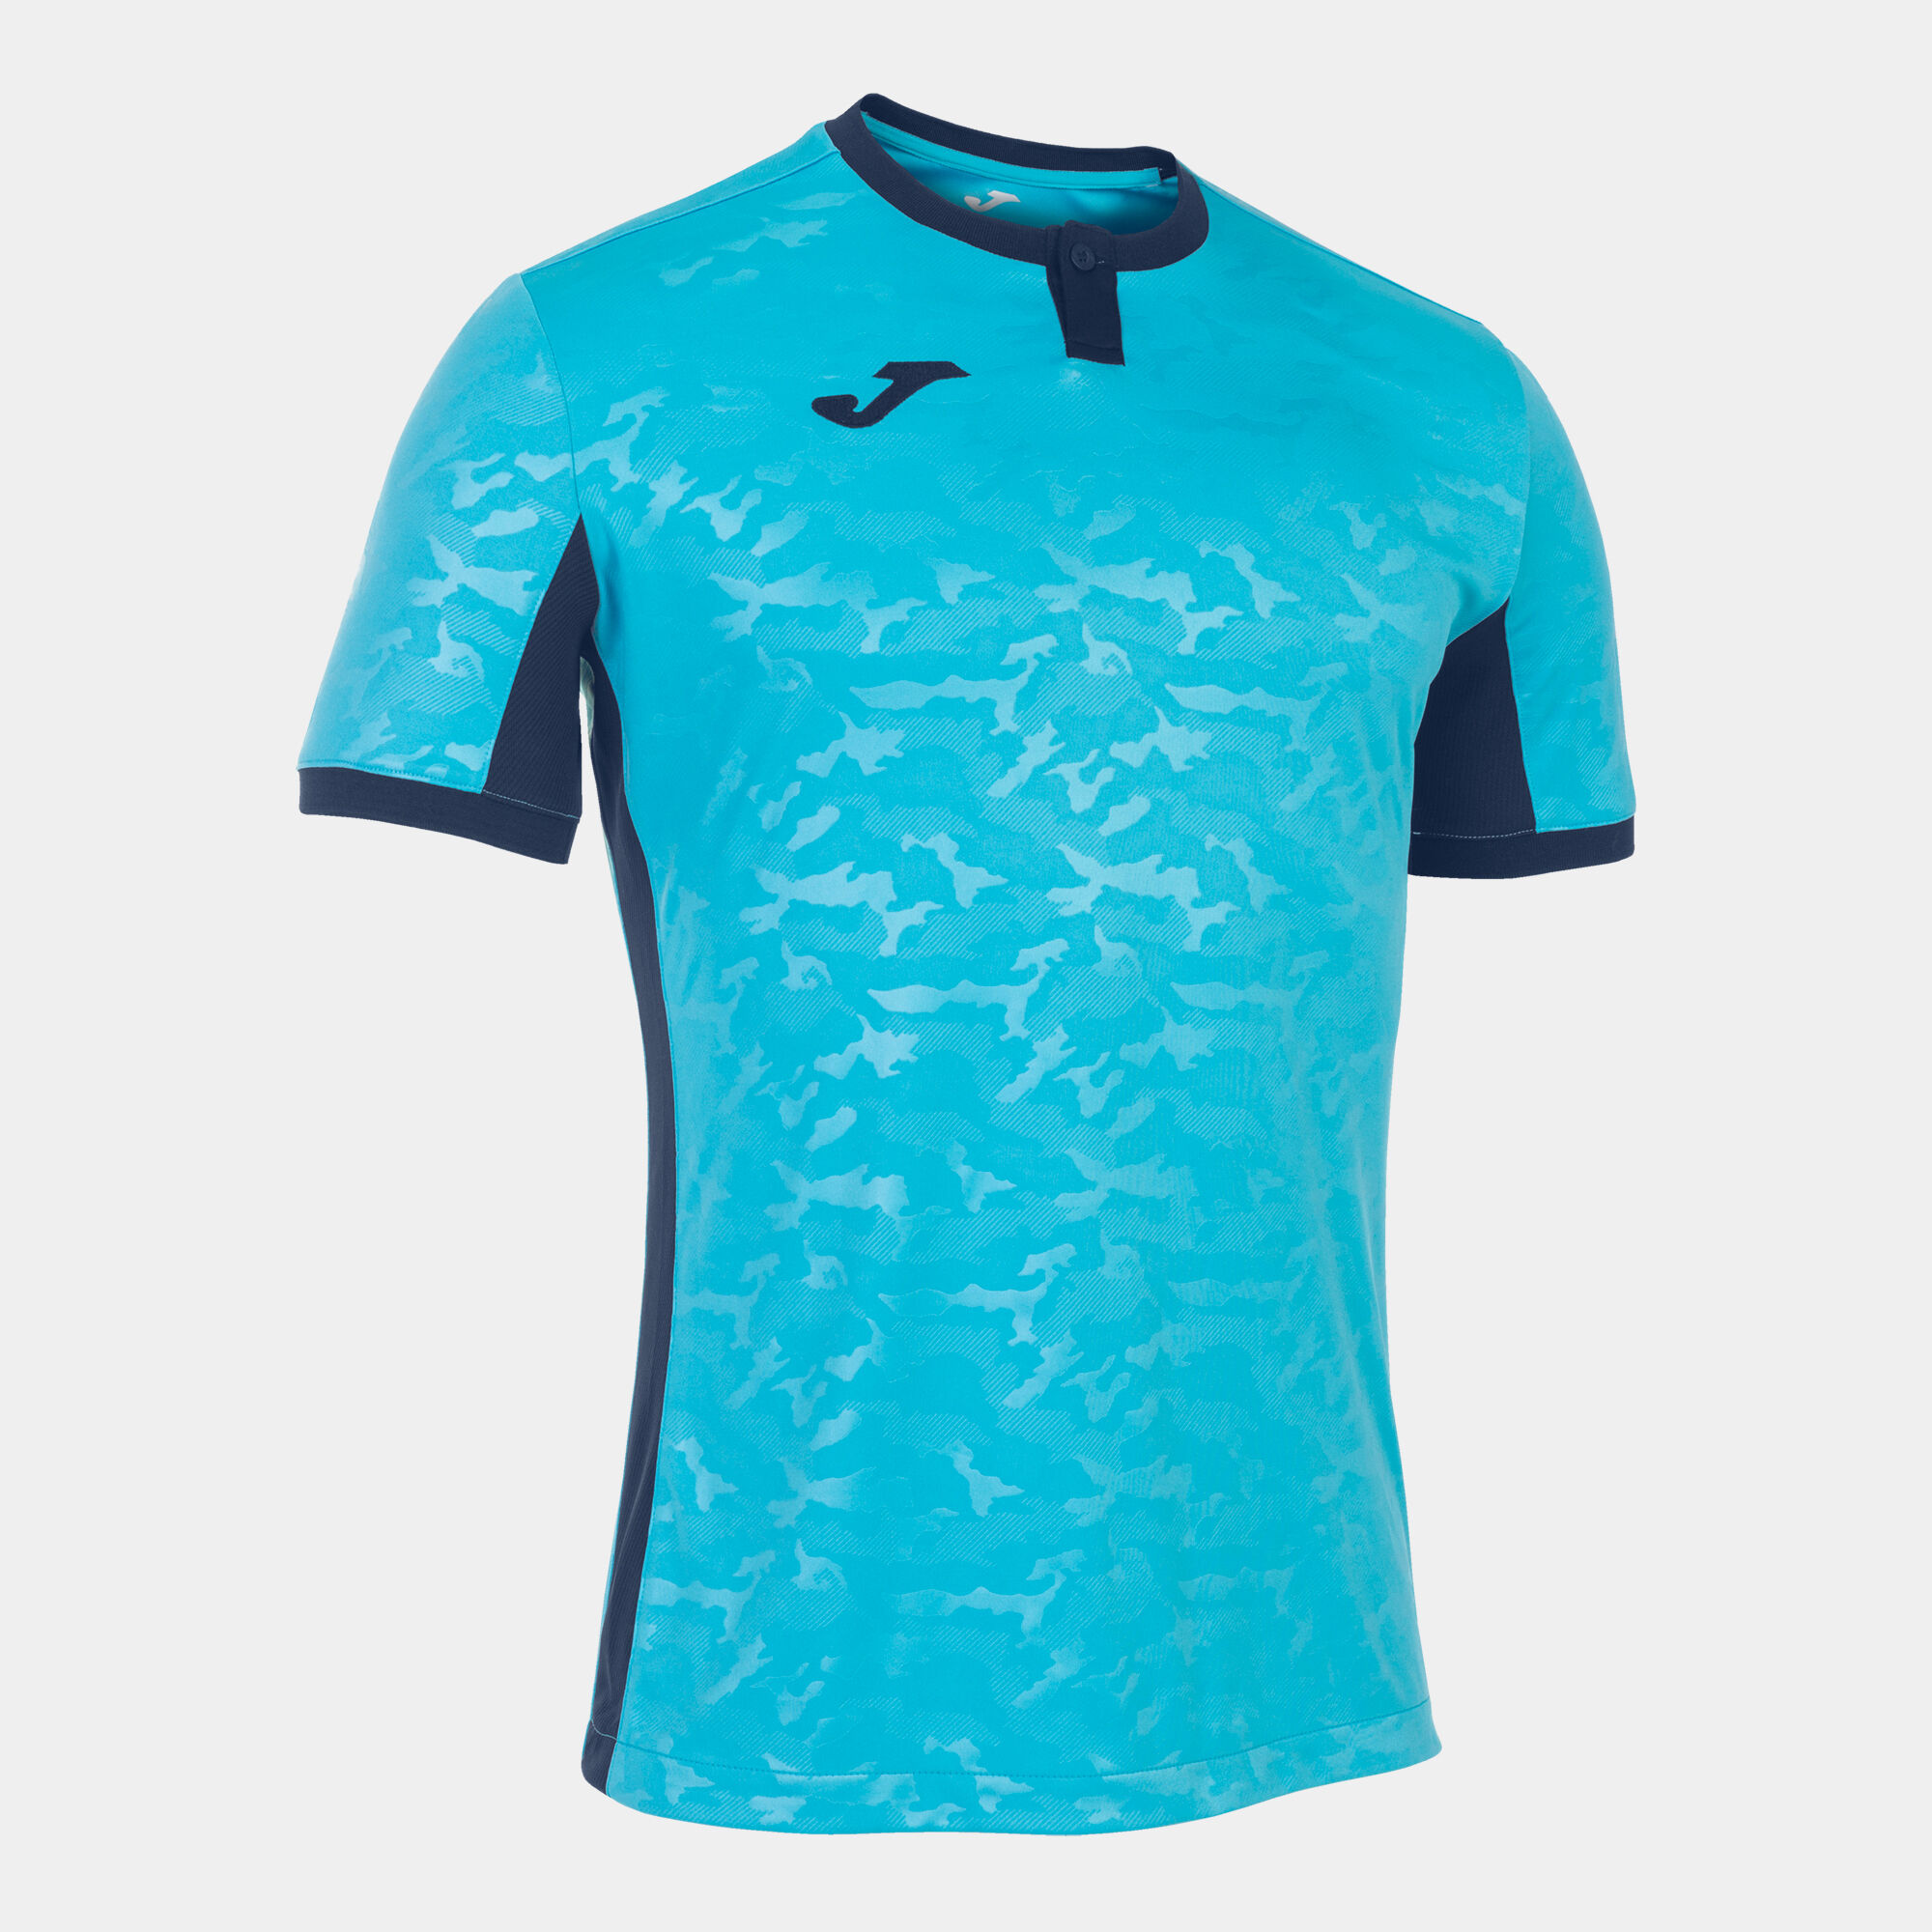 Maillot manches courtes homme Toletum II turquoise fluo bleu marine